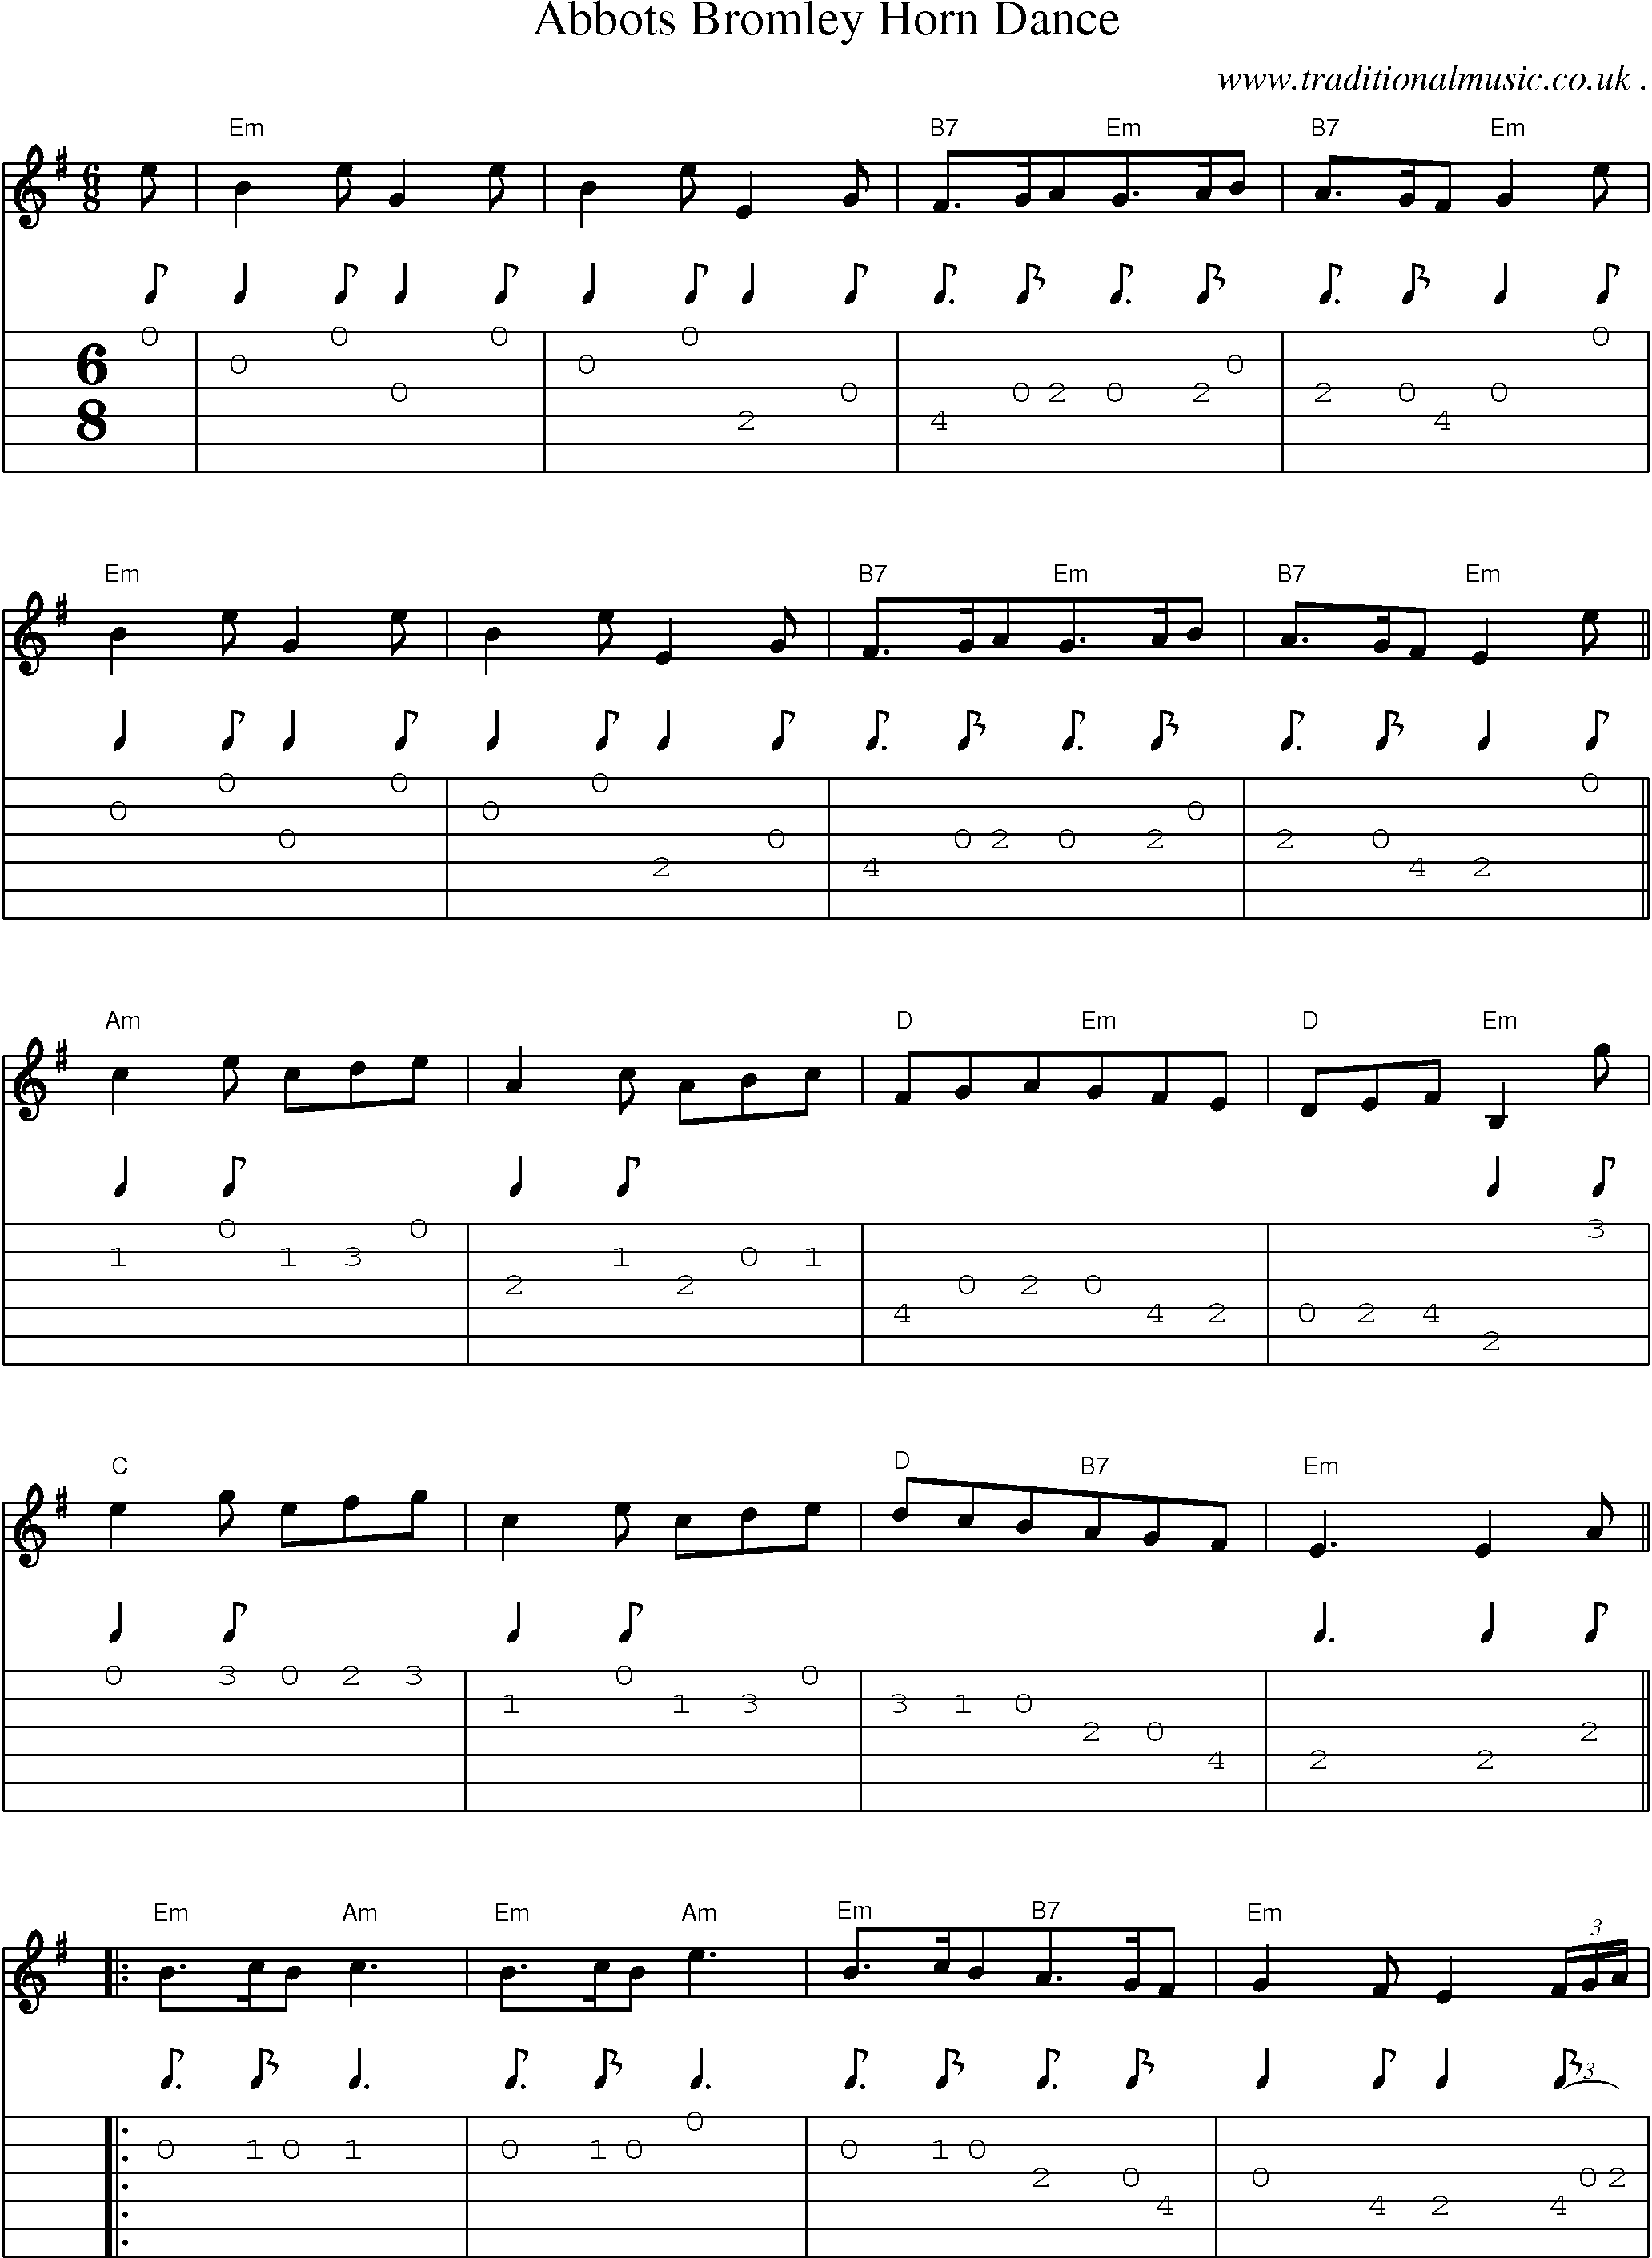 Sheet-Music and Guitar Tabs for Abbots Bromley Horn Dance